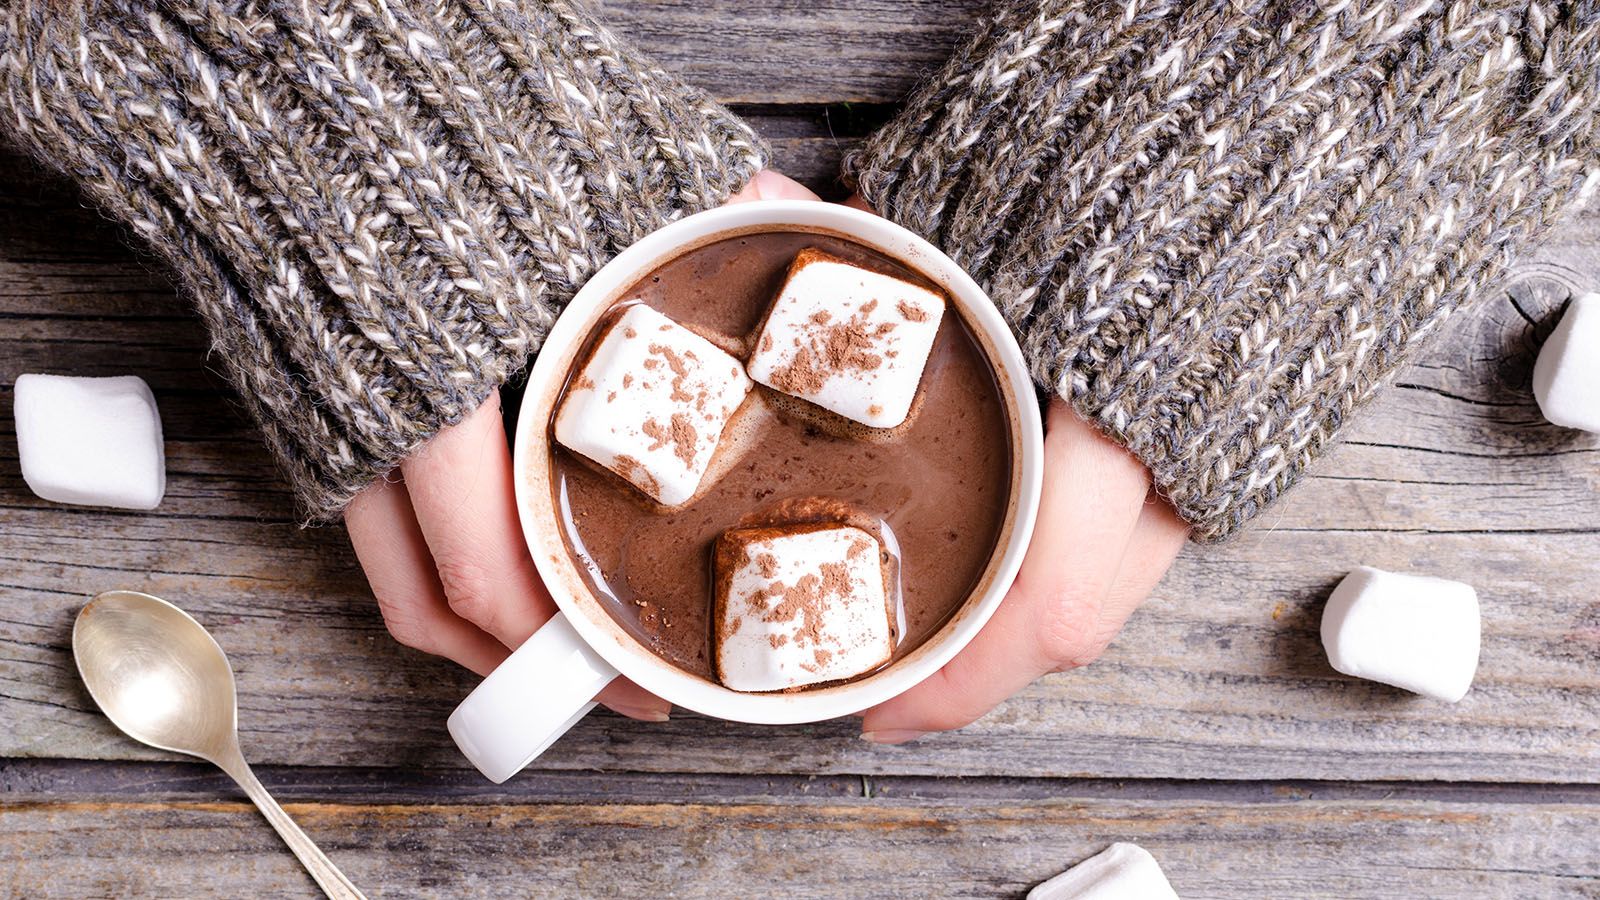 When it comes to hot chocolate, there are plenty of options in Fort Wayne.